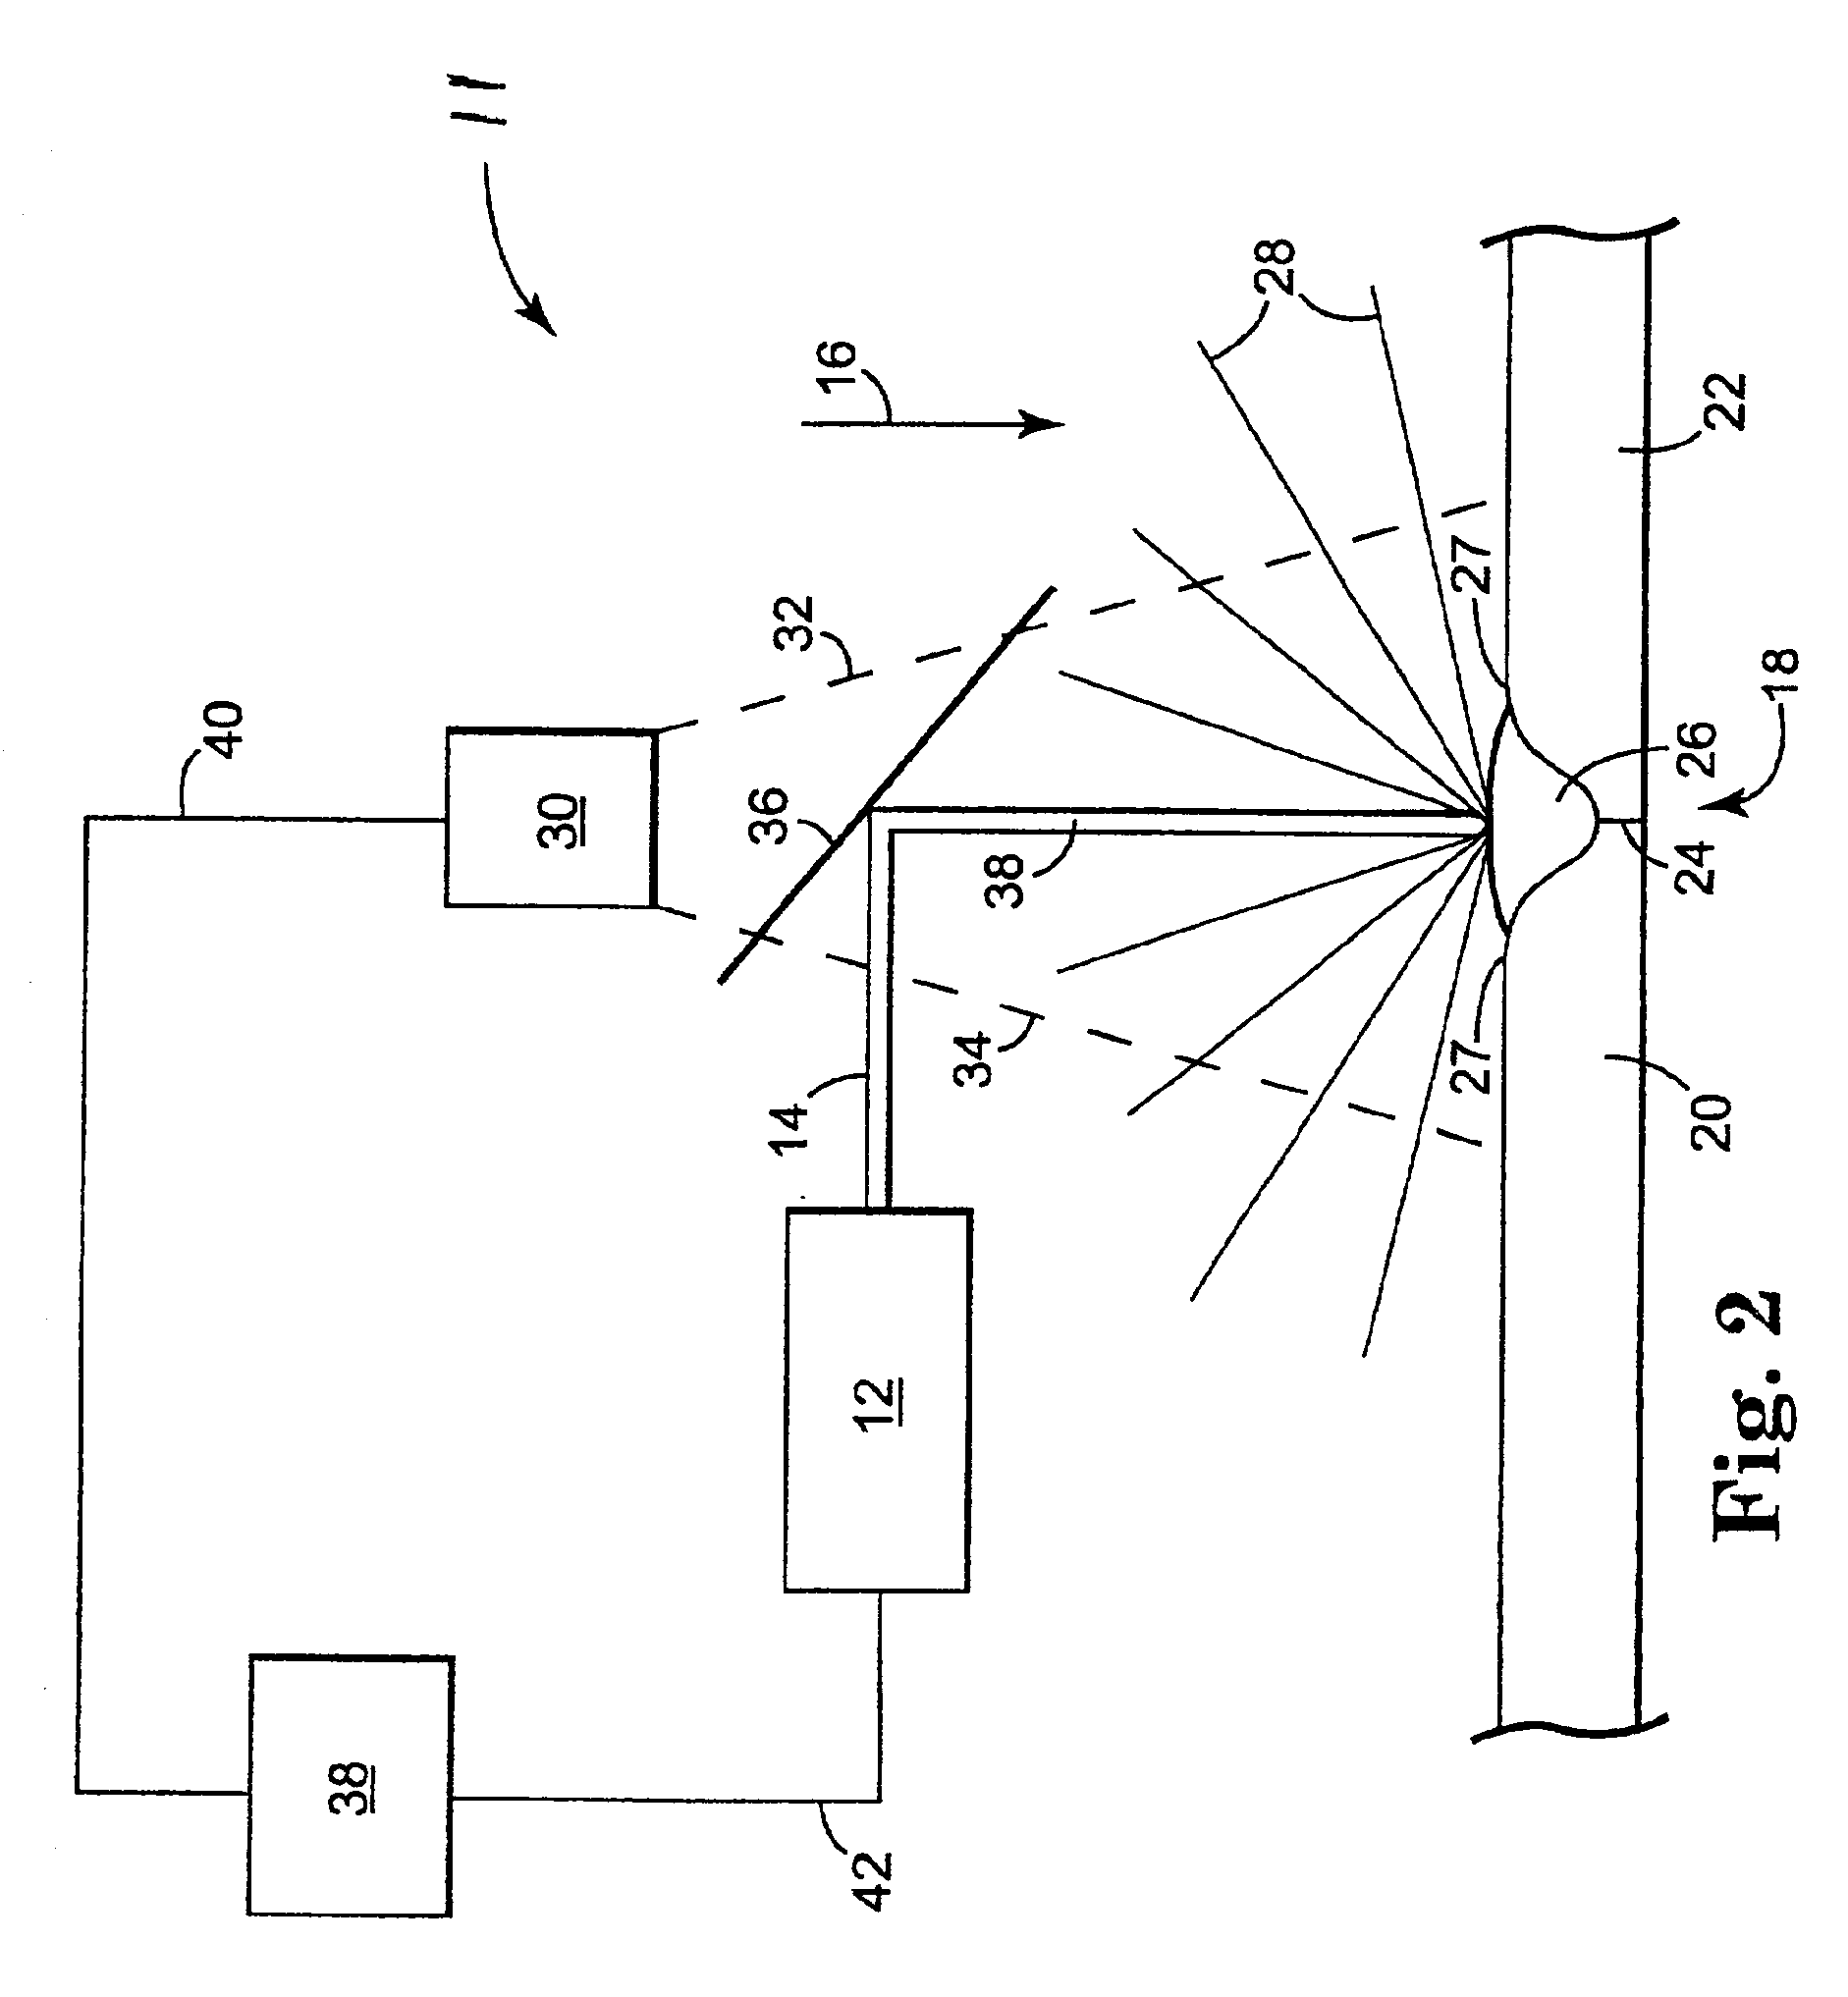 Apparatus and method for closed-loop control of laser welder for welding polymeric catheter components